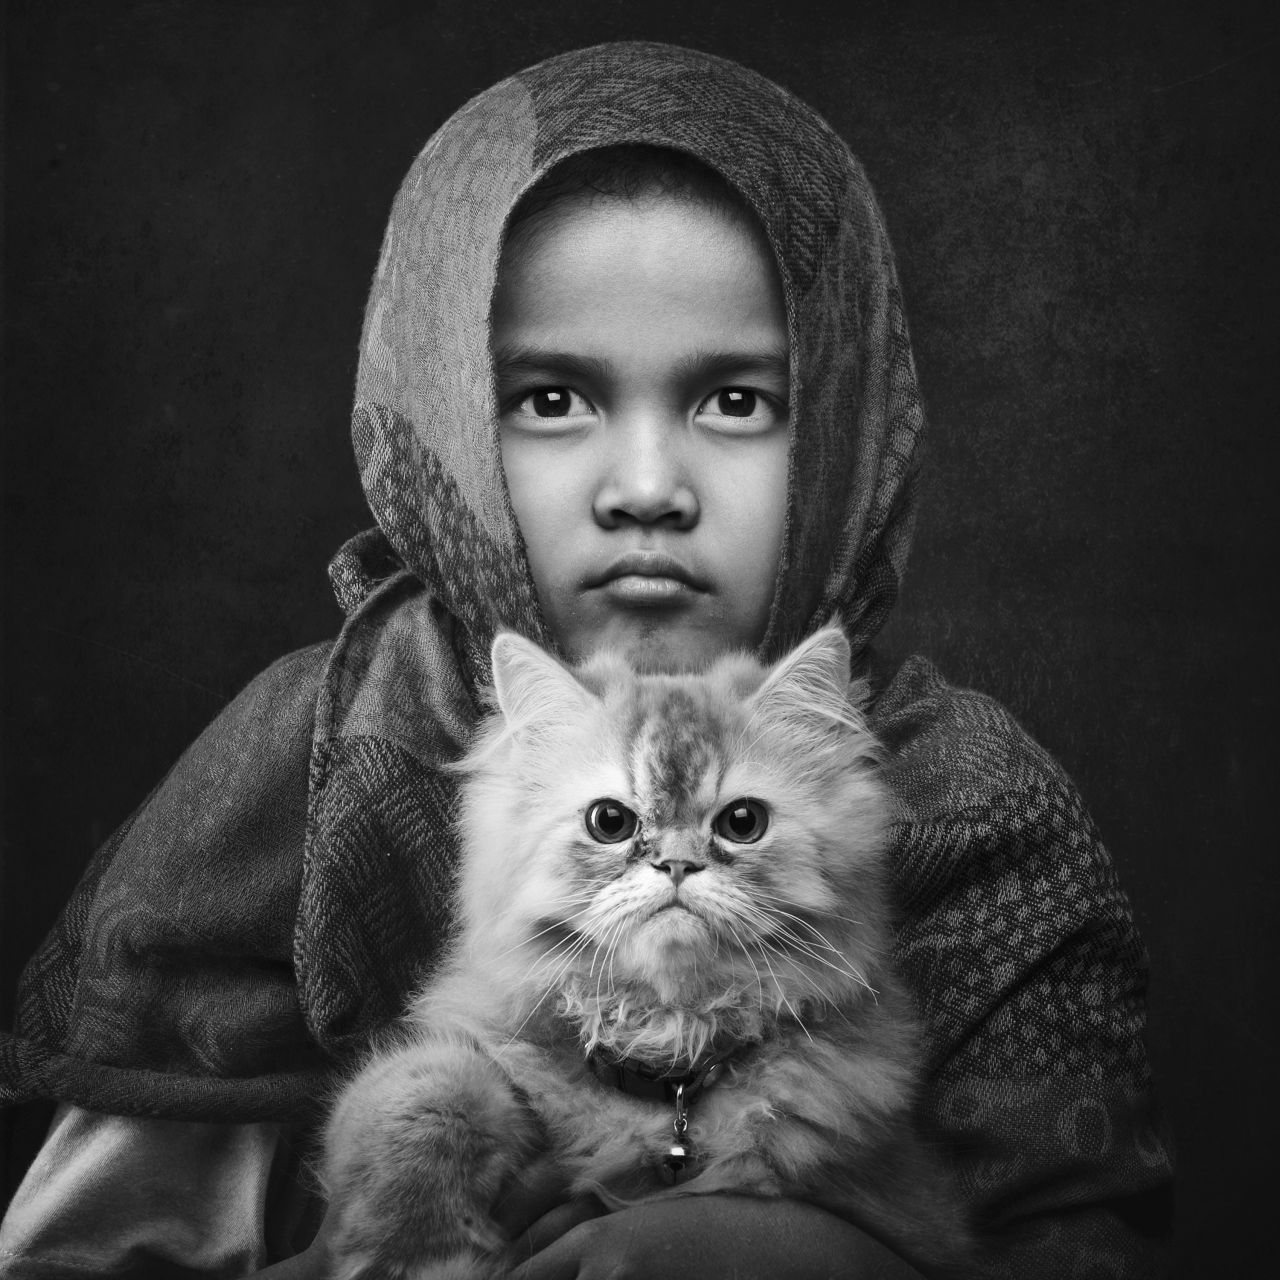 <strong>"Timeless Affection," by Arief Siswandhono</strong><br /><br />Arief Siswandhono, from Indonesia, used Fina, the youngest of his two daughters, as his subject.<br />"Fina used to be scared of cats, which was the reason why we decided to adopt two kittens," Siswandhono says.<br /> <br />"We wanted Fina to learn how to live with cats, how to hold them, how to care for them and how to treat them as family members to help her overcome her fear. Now we can proudly say she did!  <br /><br />"Day by day, seven months passed by and today Fiona and the cats are best friends, and love and care for each other. In this picture I wanted to show how gracefully they are together."